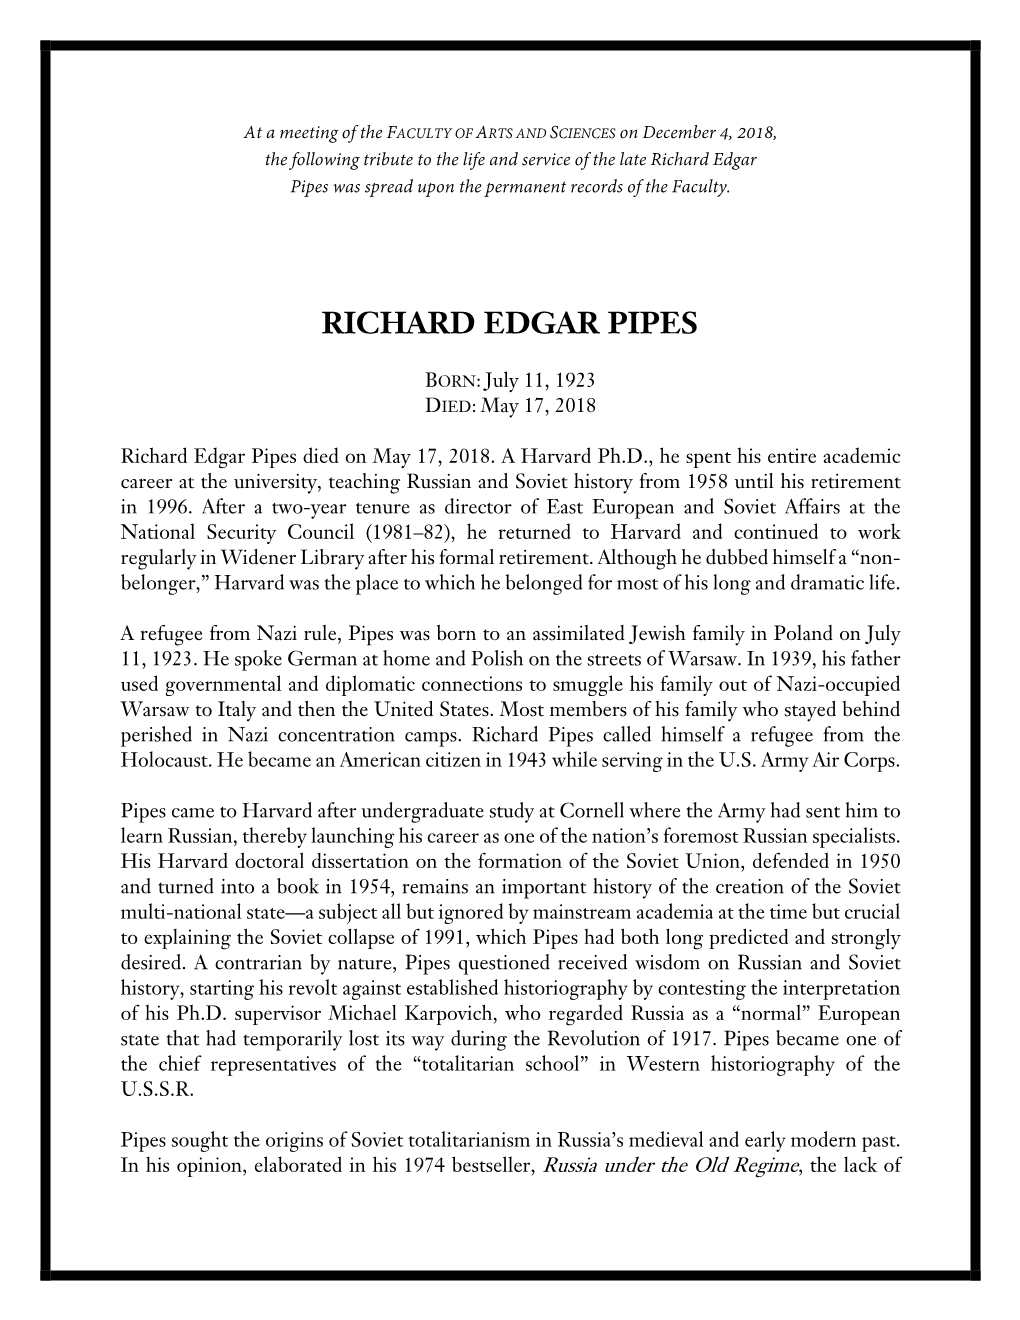 Richard Edgar Pipes Was Spread Upon the Permanent Records of the Faculty